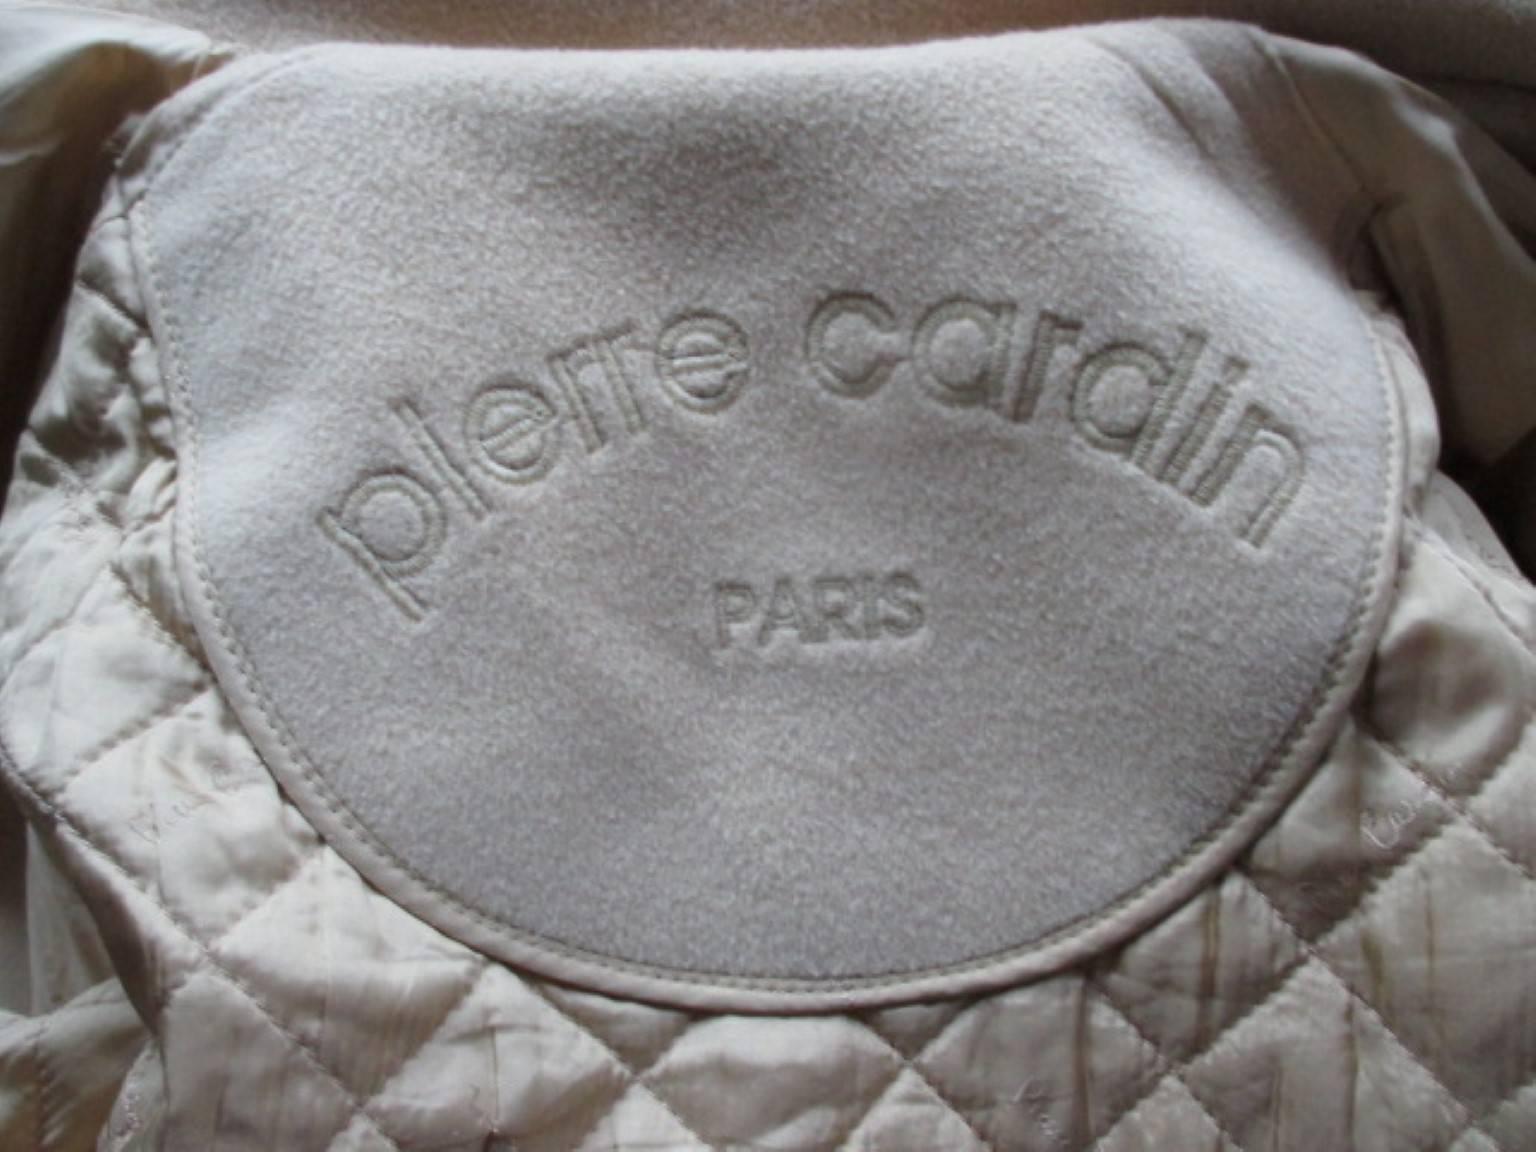 Vintage stylish Pierre Cardin creme color wool/angora coat with 2 pockets.
Size fits like medium, EU 40
Please note that vintage items are not new and therefore might have minor imperfections. 